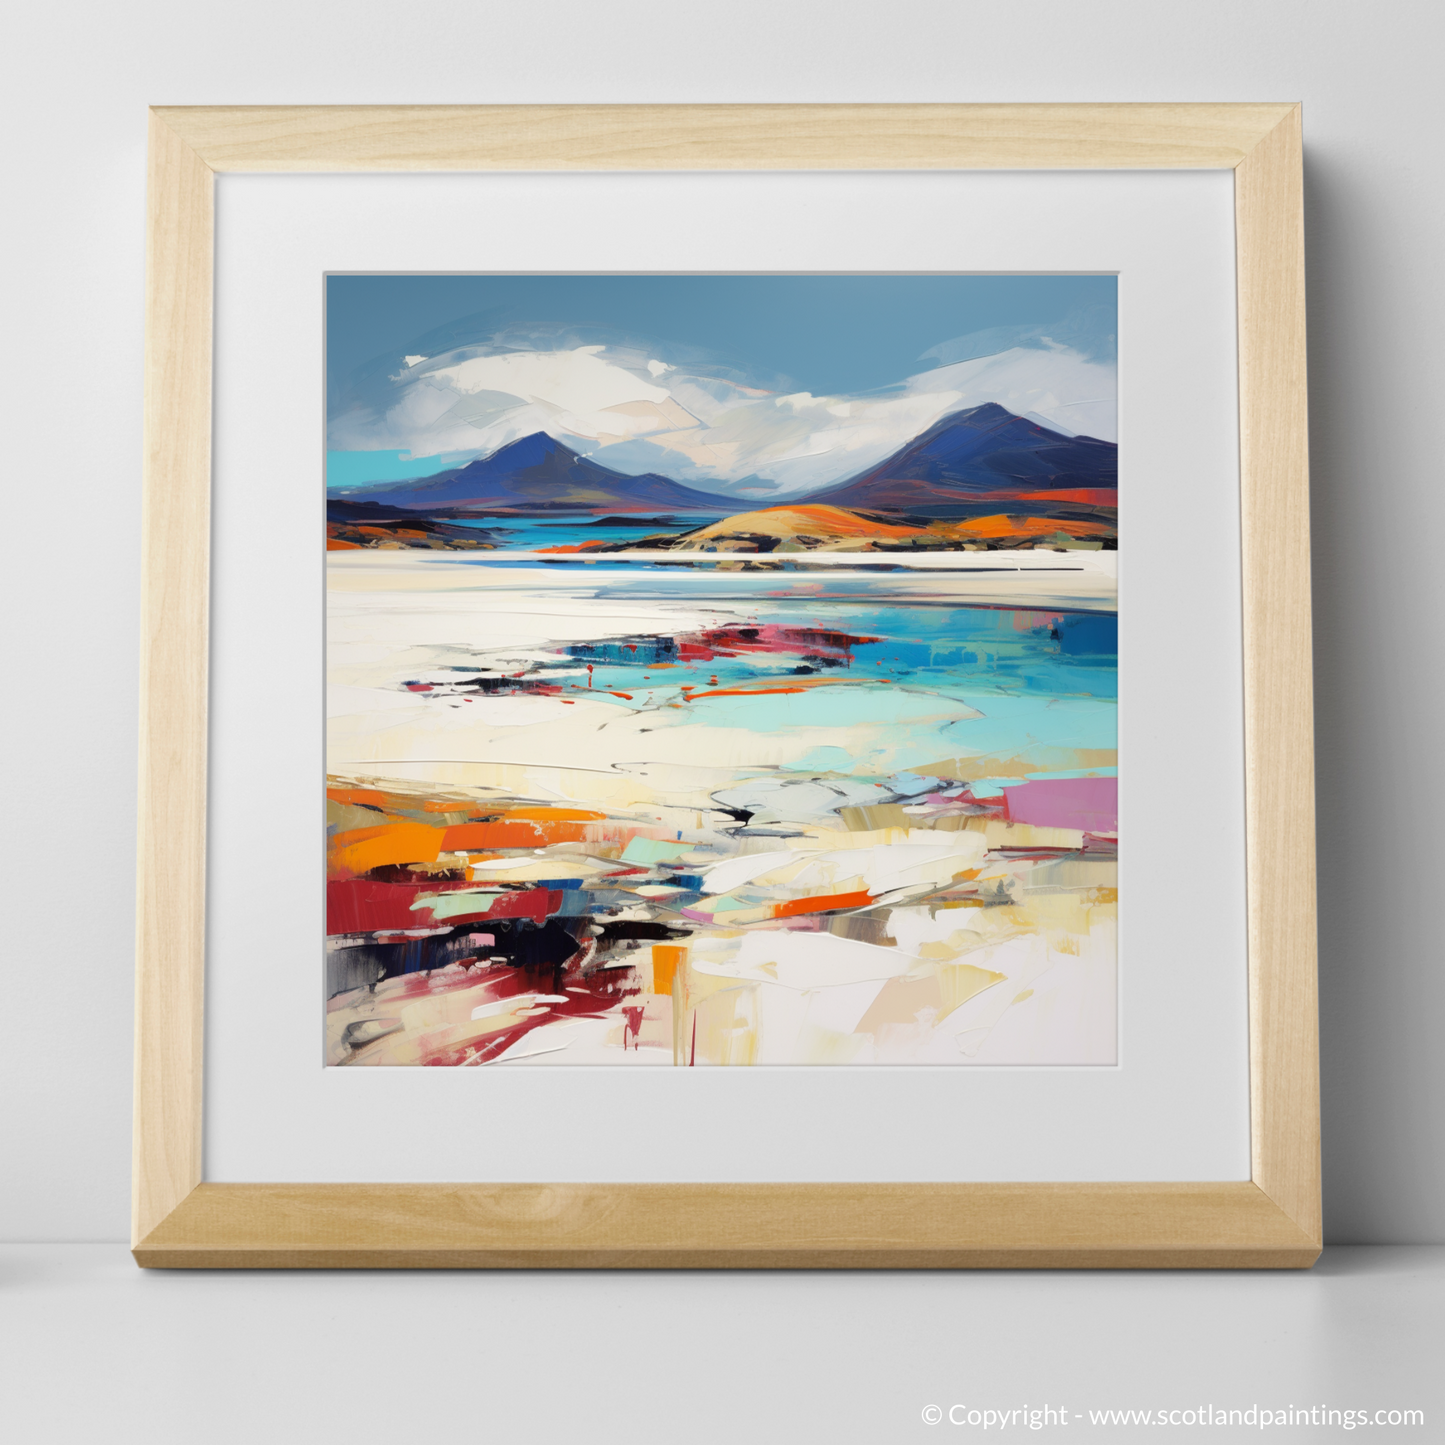 Art Print of Luskentyre Sands, Isle of Lewis with a natural frame